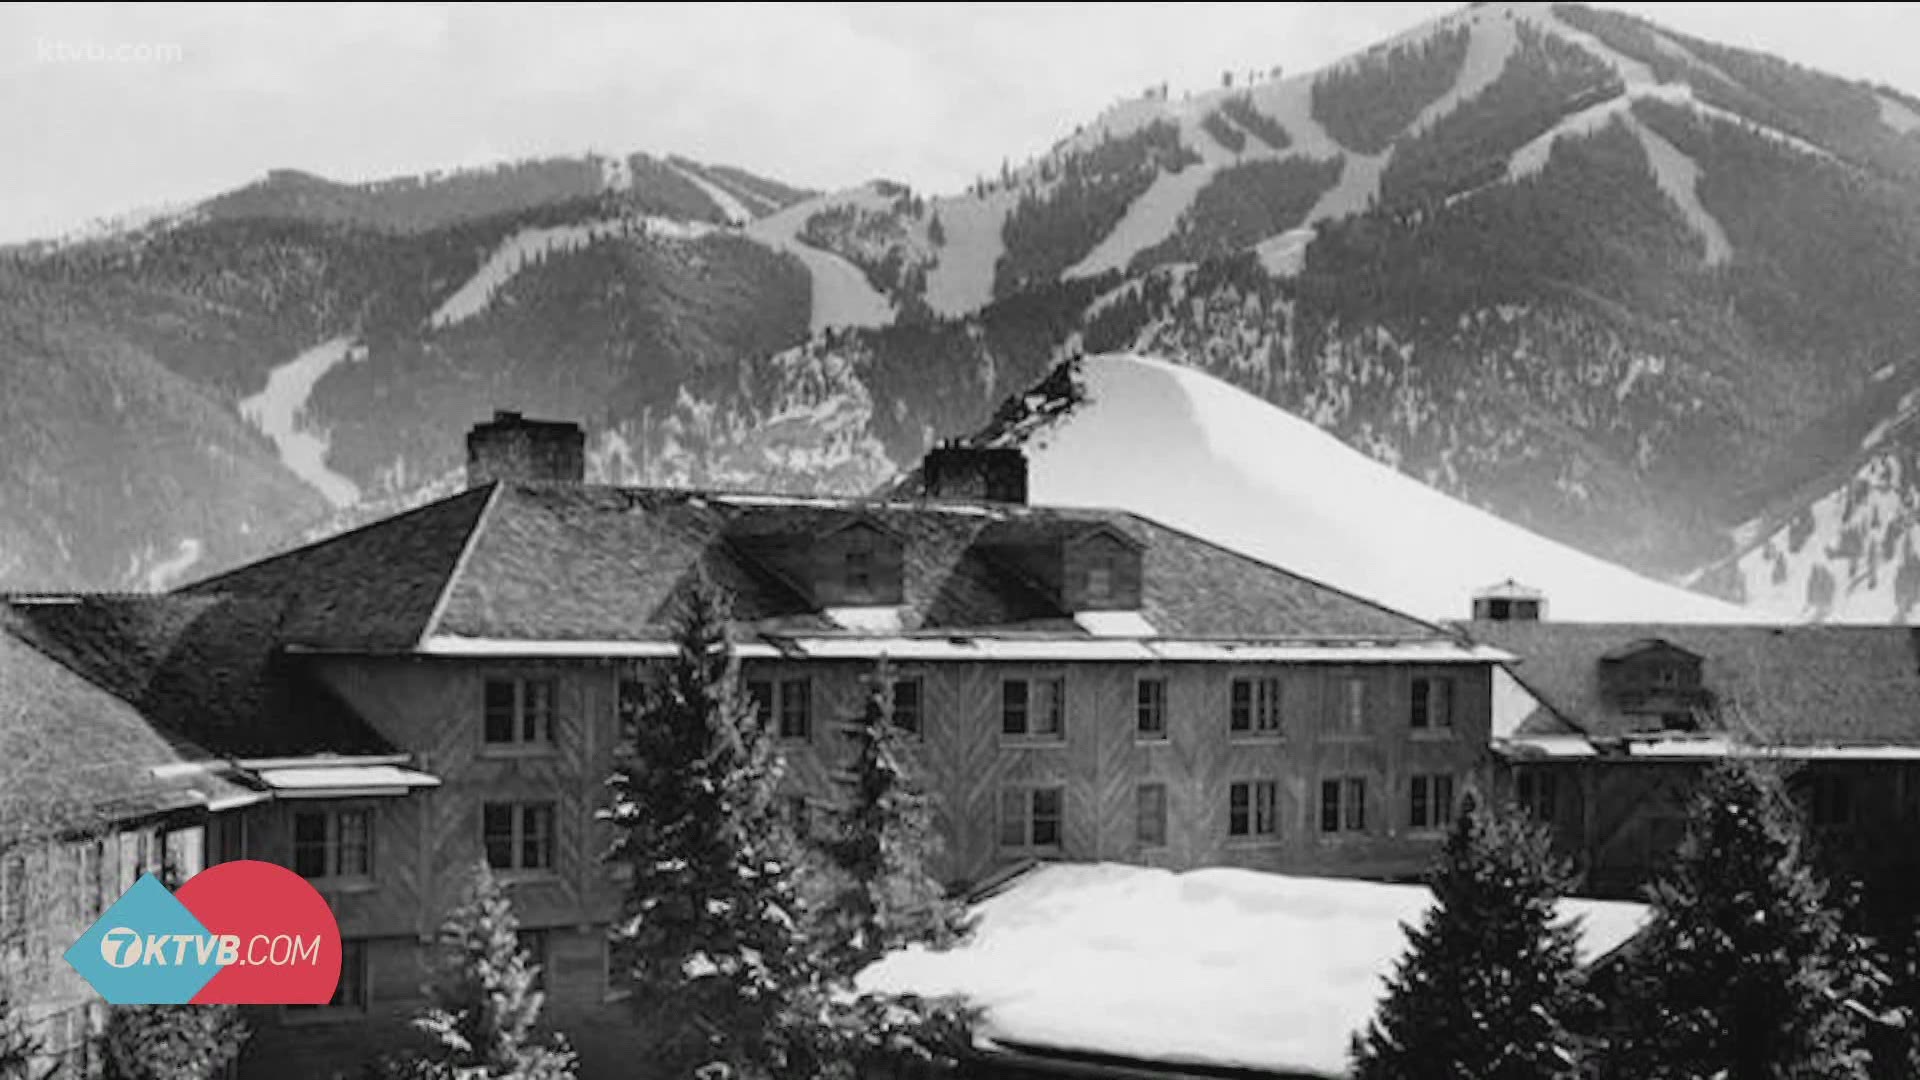 The Sun Valley Lodge turned 84 on Monday. We take a look back to 2015 when the lodge was undergoing a major renovation.